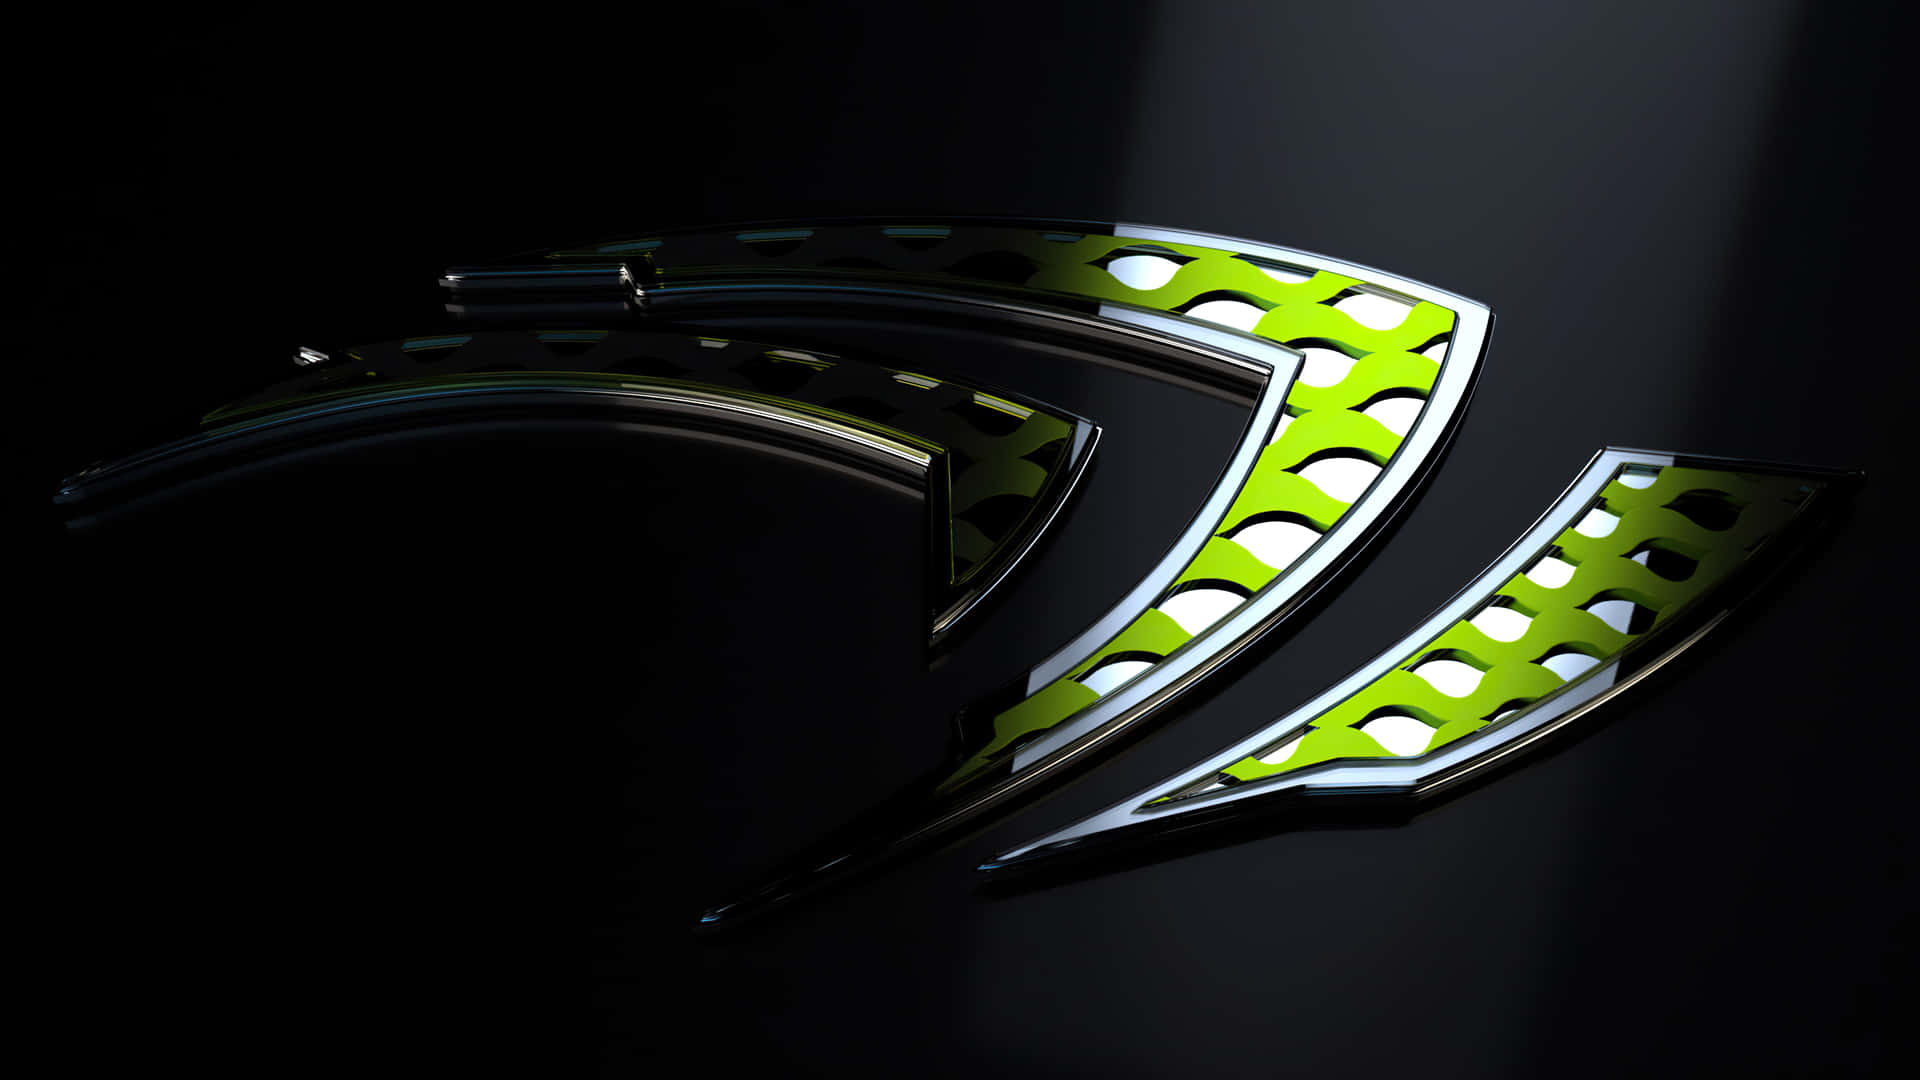 Discover the amazing graphics performance of NVIDIA graphics